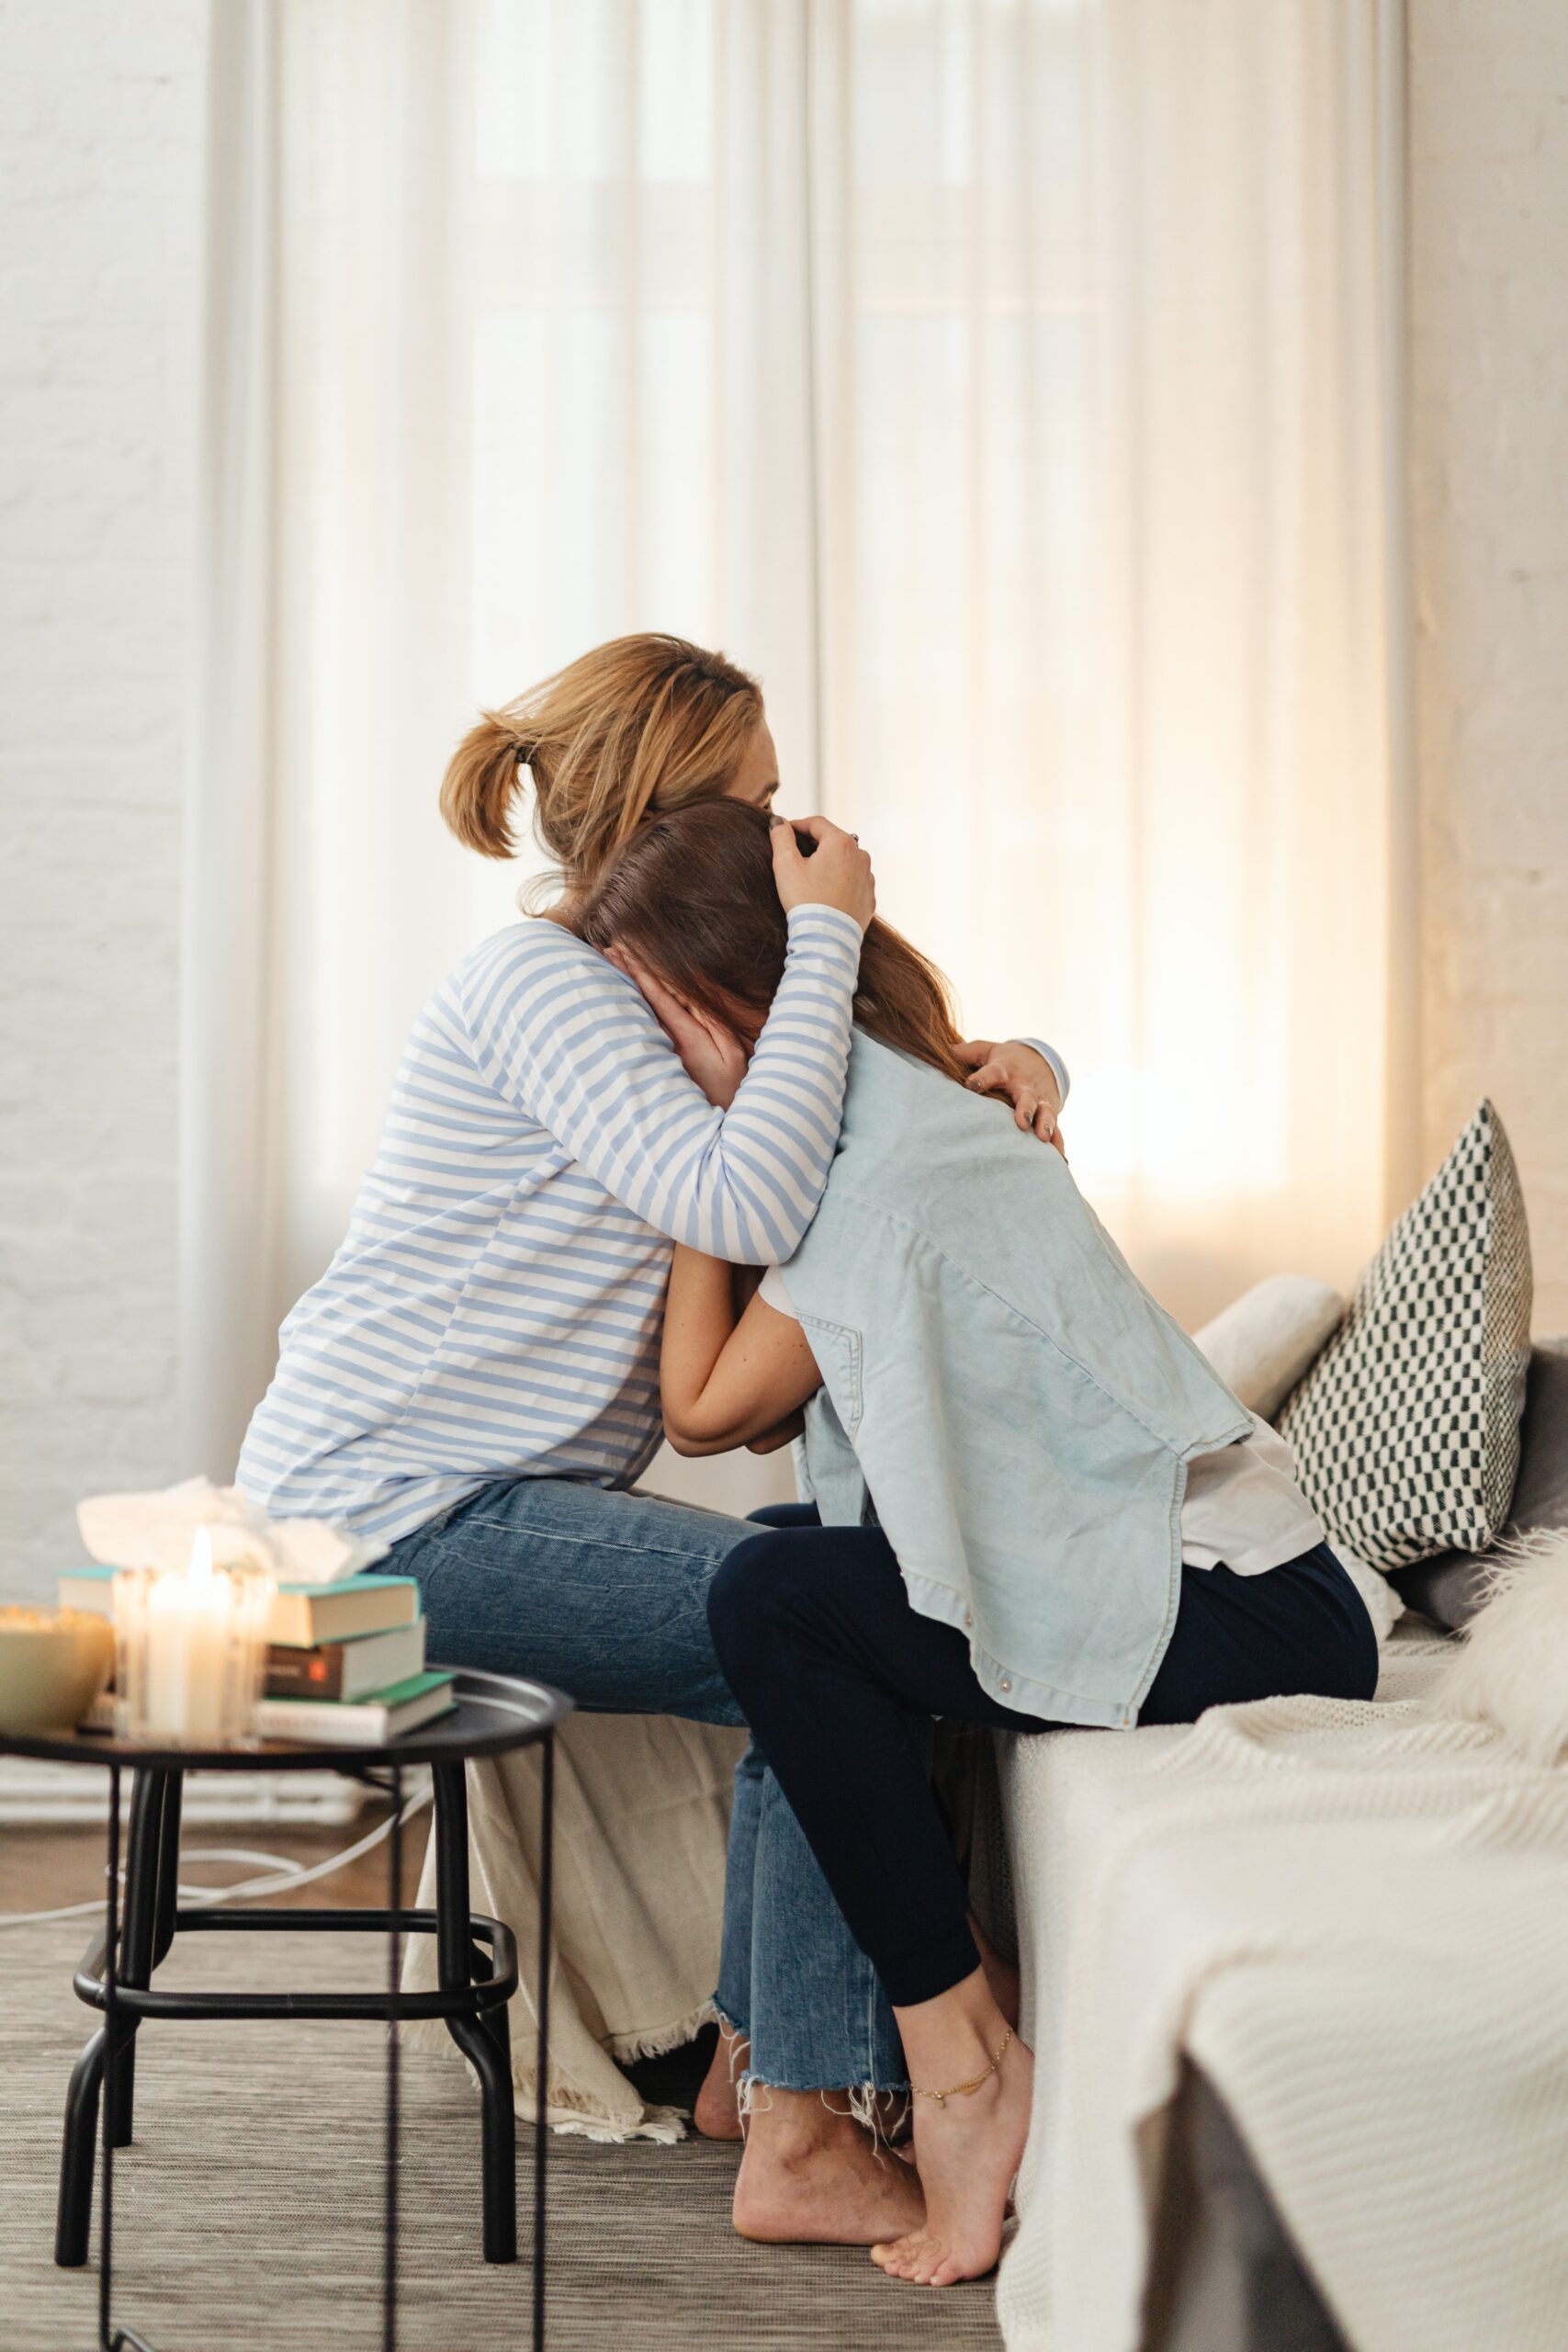 How Family Members Can Support a Loved One in Recovery